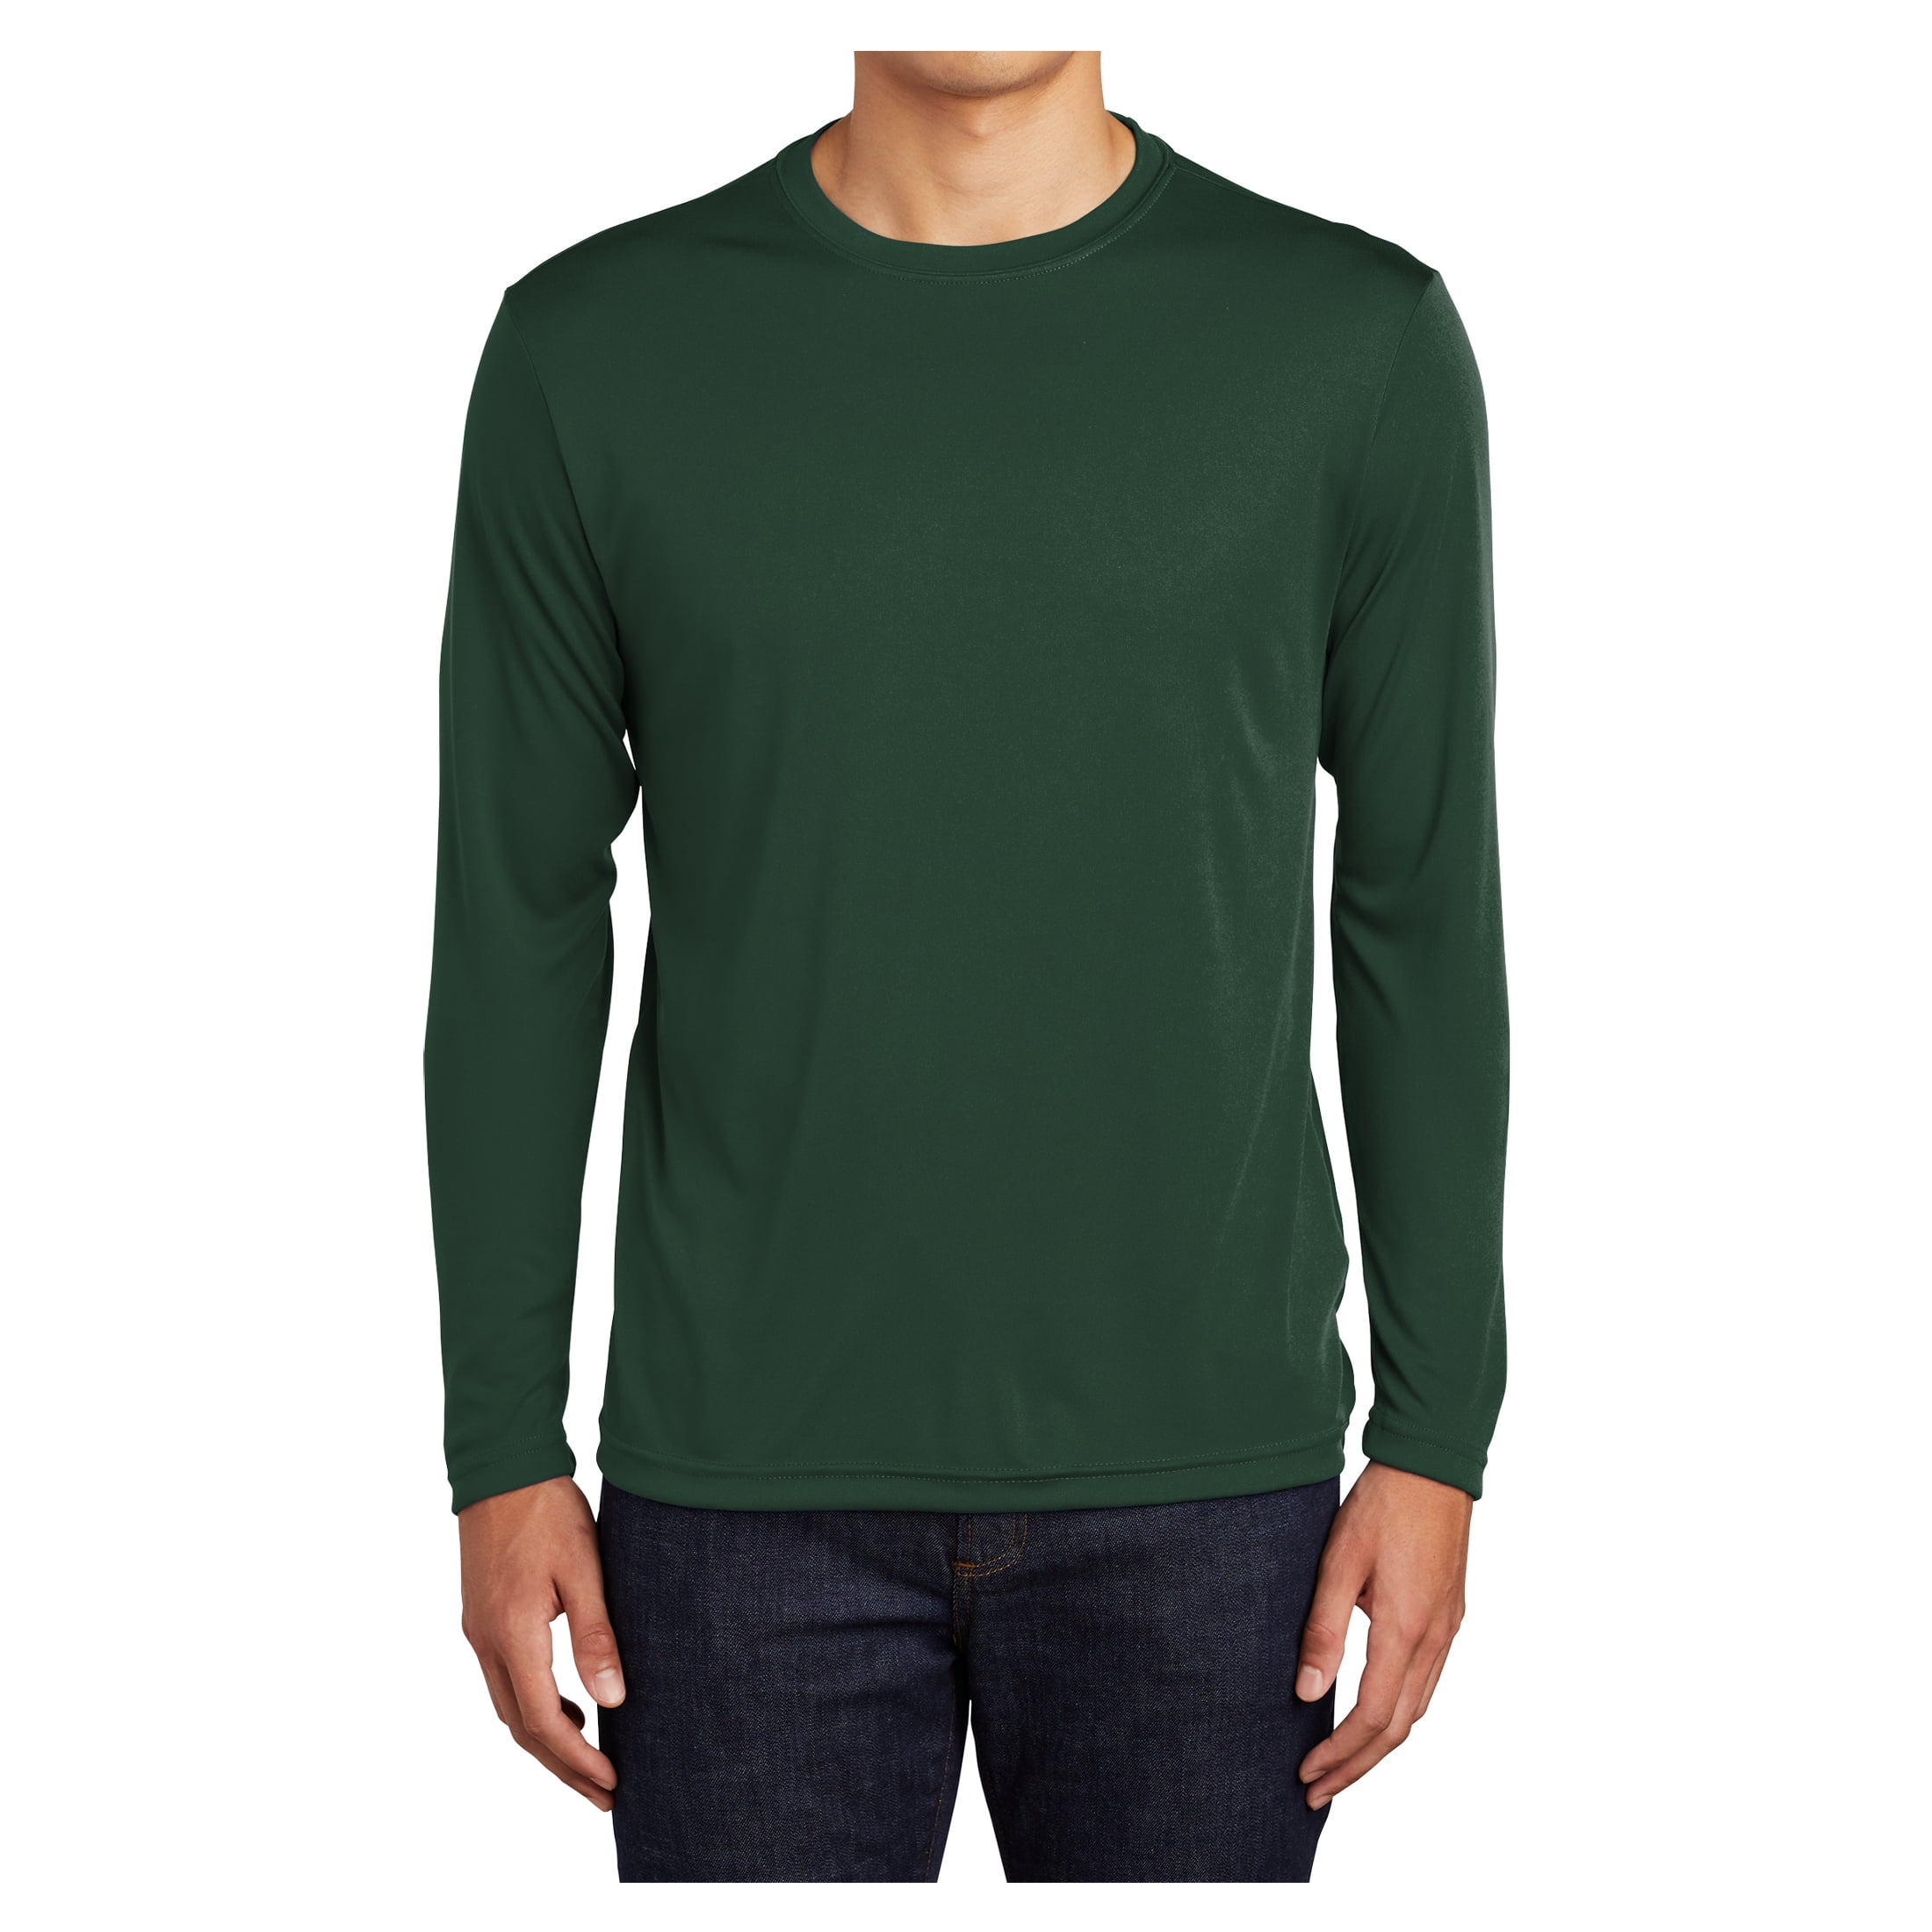 Mens Long Sleeve PosiCharge Competitor Polyester Tee Shirt Forest Green L